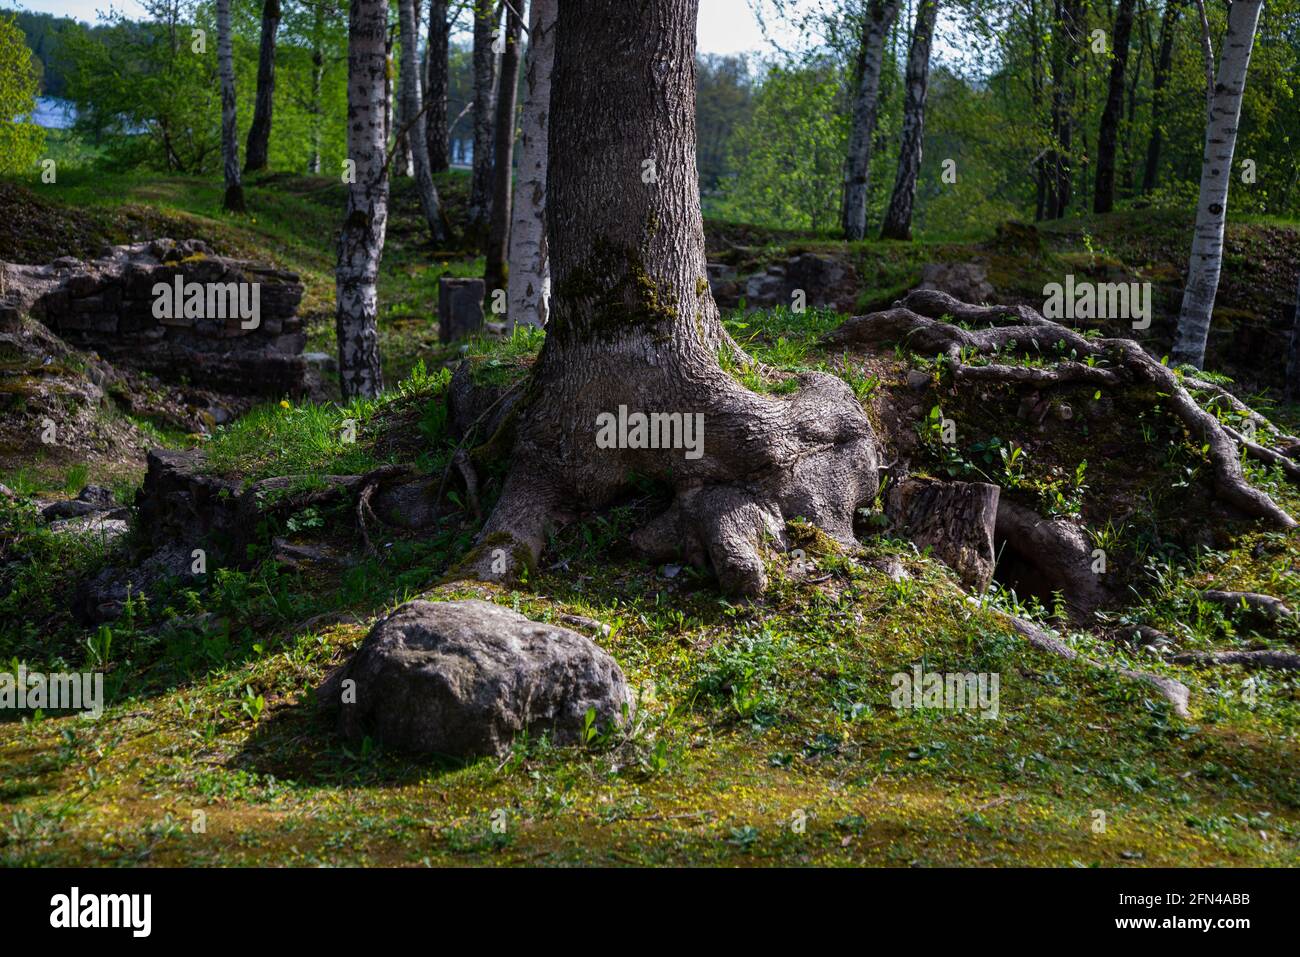 Close-up of a huge tree root with a boulder next to it and green grass. Stock Photo